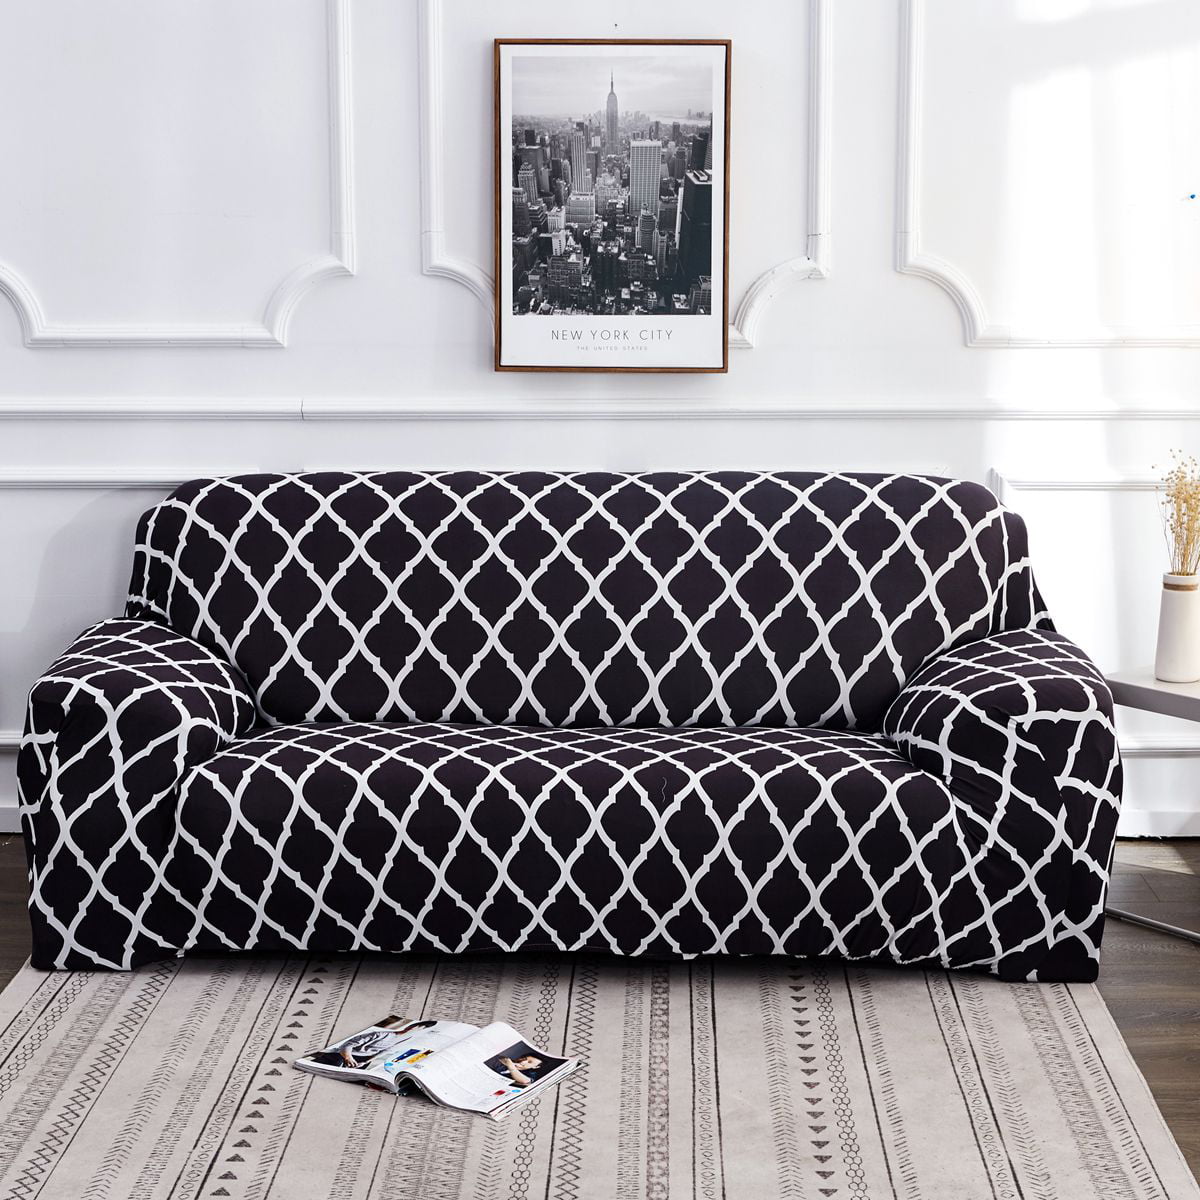 1/2/3/4 Seat Sofa cover Simple Printed Elastic Slipcover Removable Home Decor 